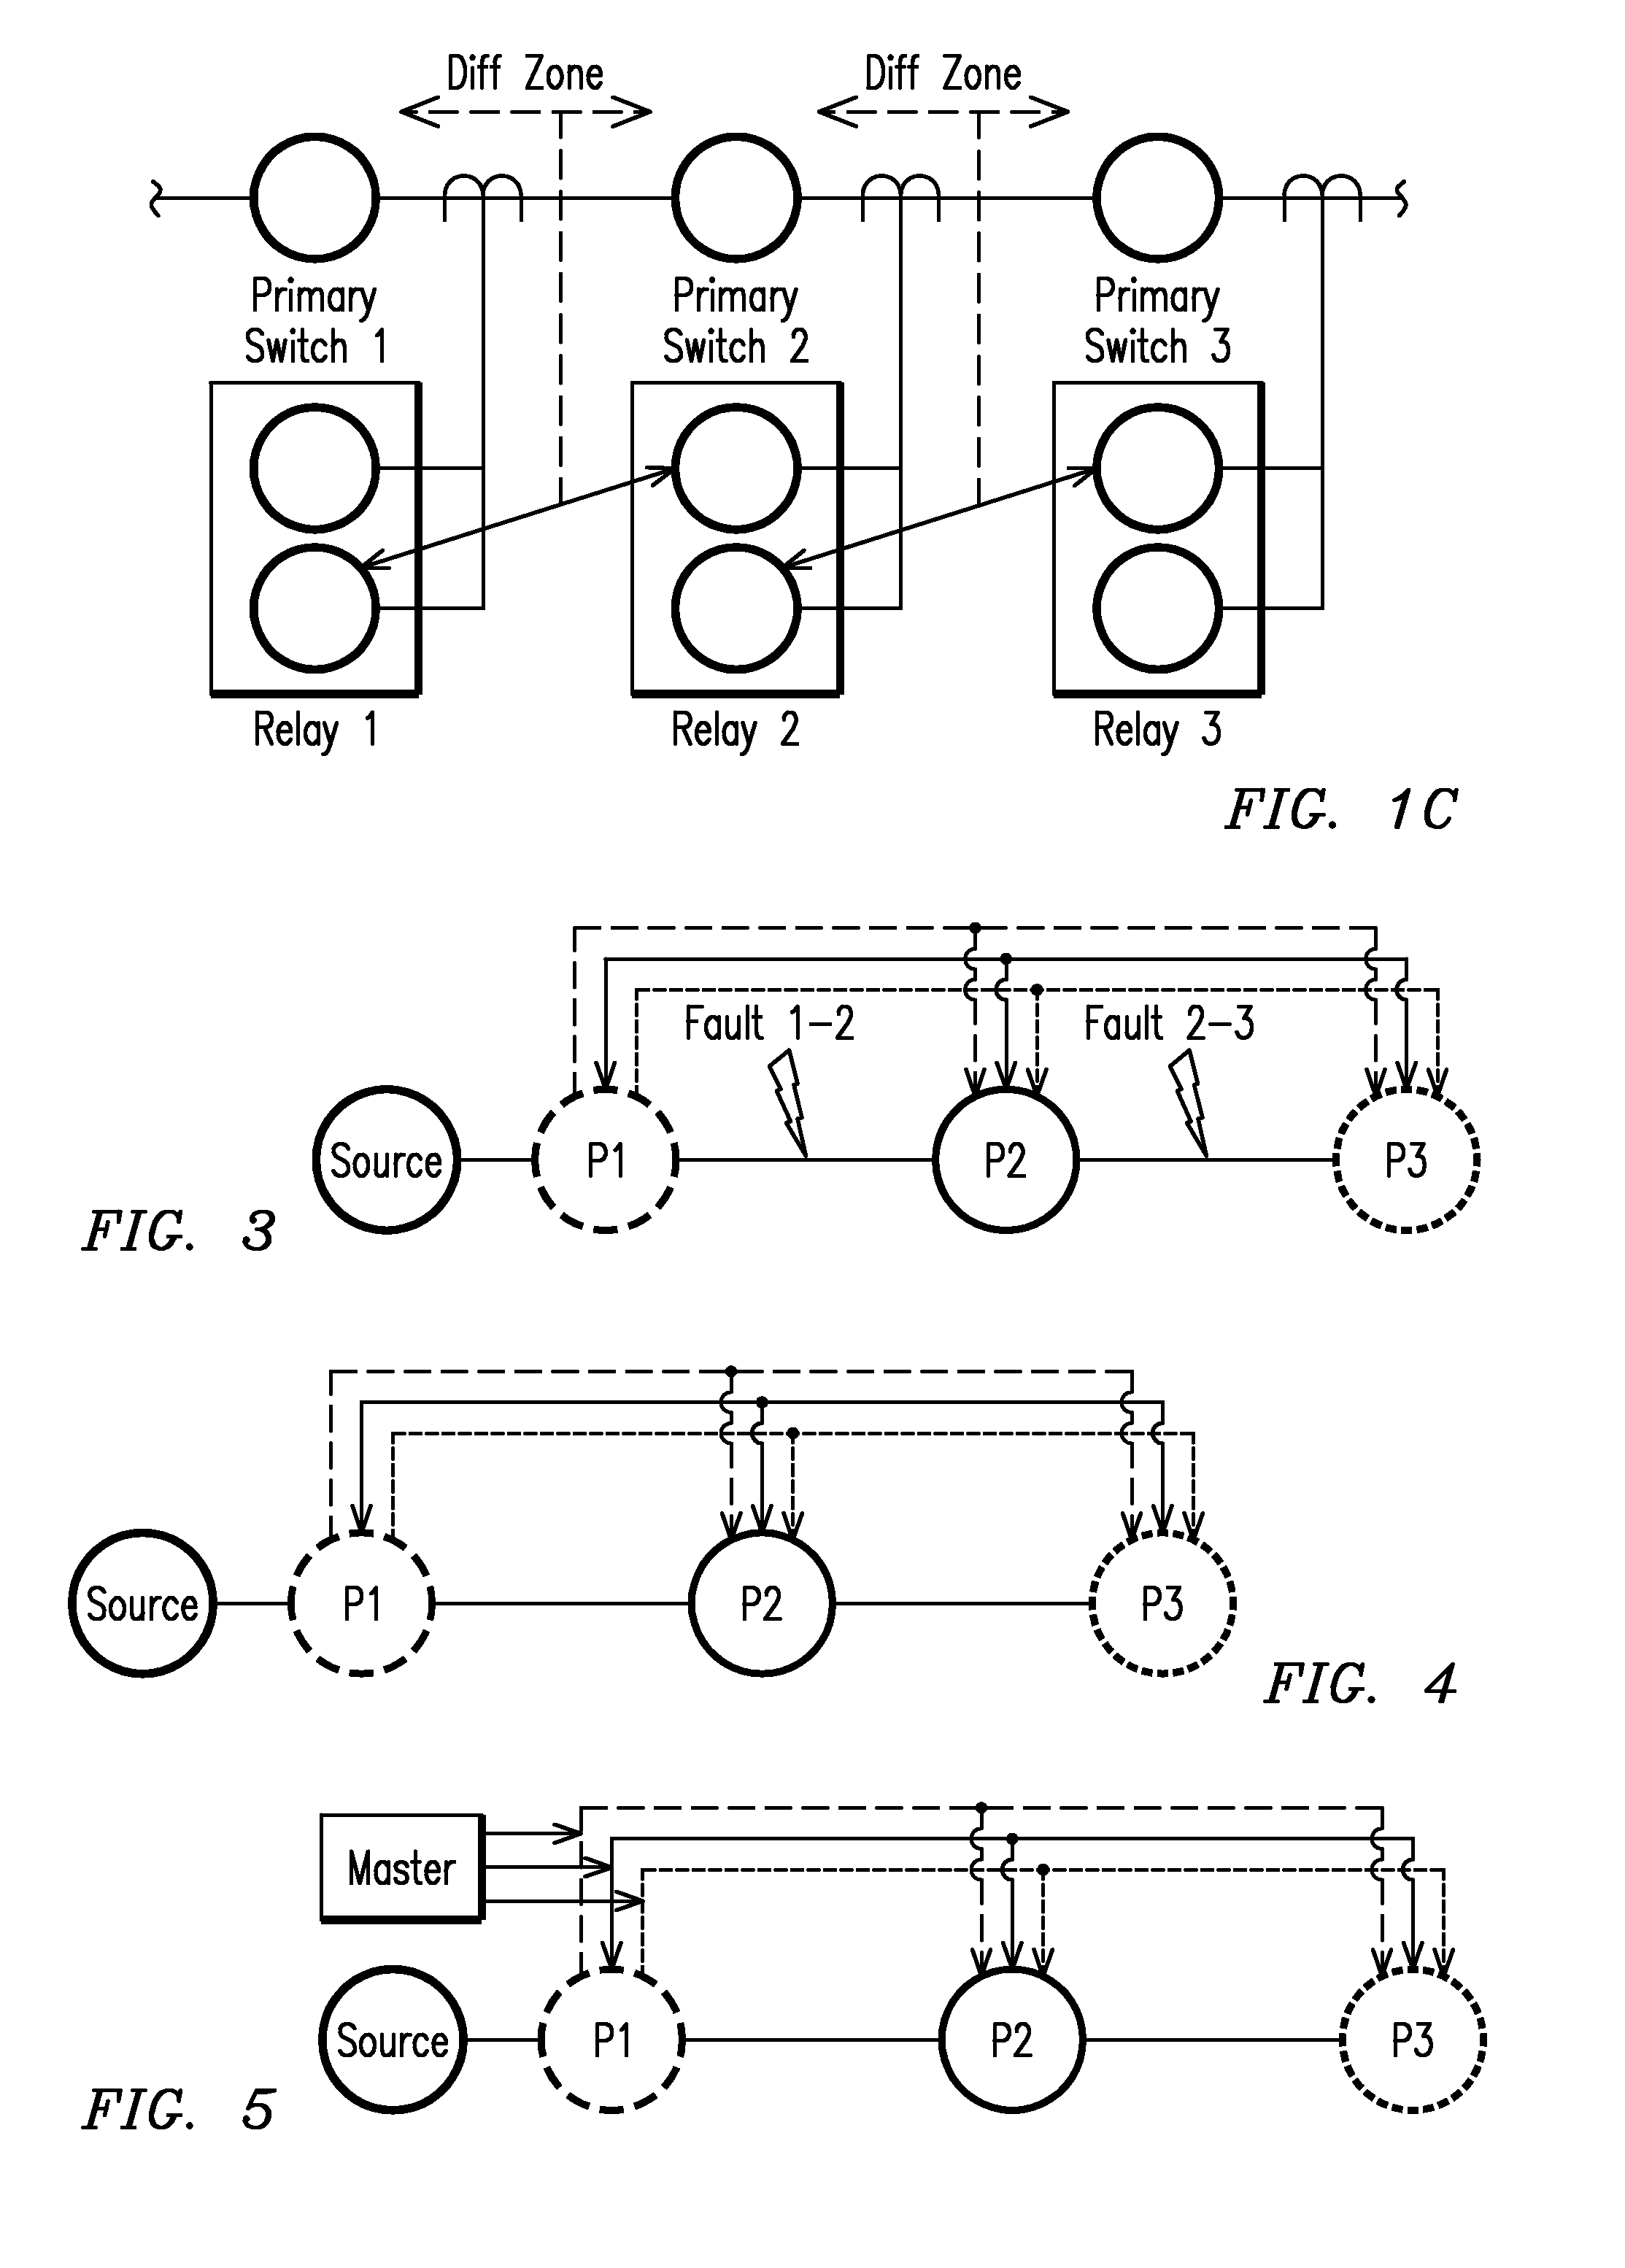 Method and system for programming and implementing automated fault isolation and restoration using sequential logic